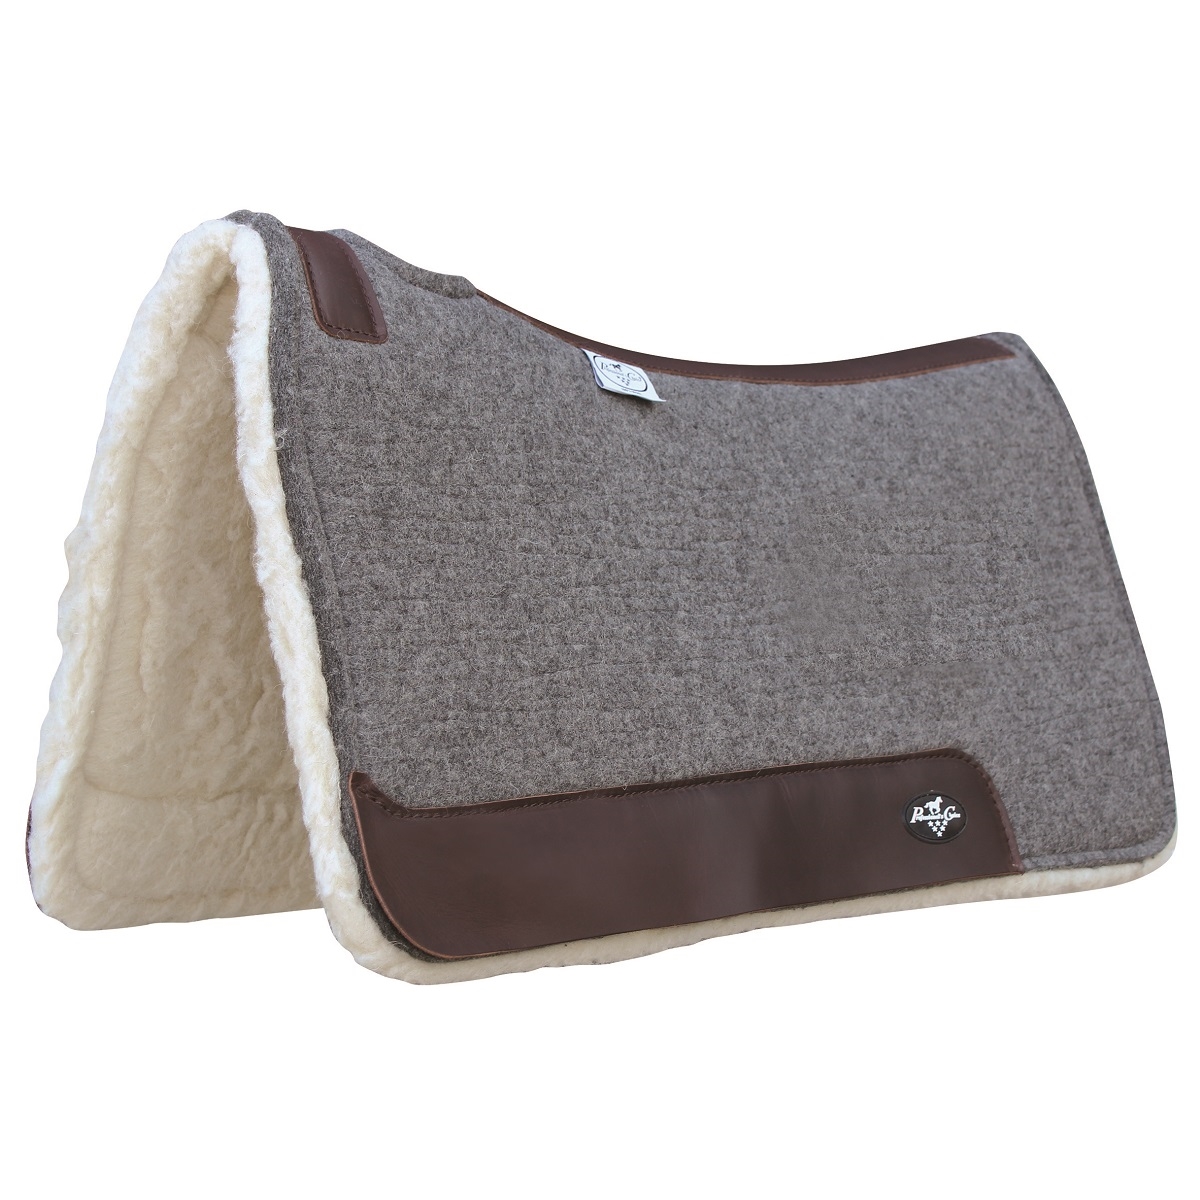 Professional's Choice Comfort-Fit Steam-Pressed Deluxe 100% Wool Barrel Pad